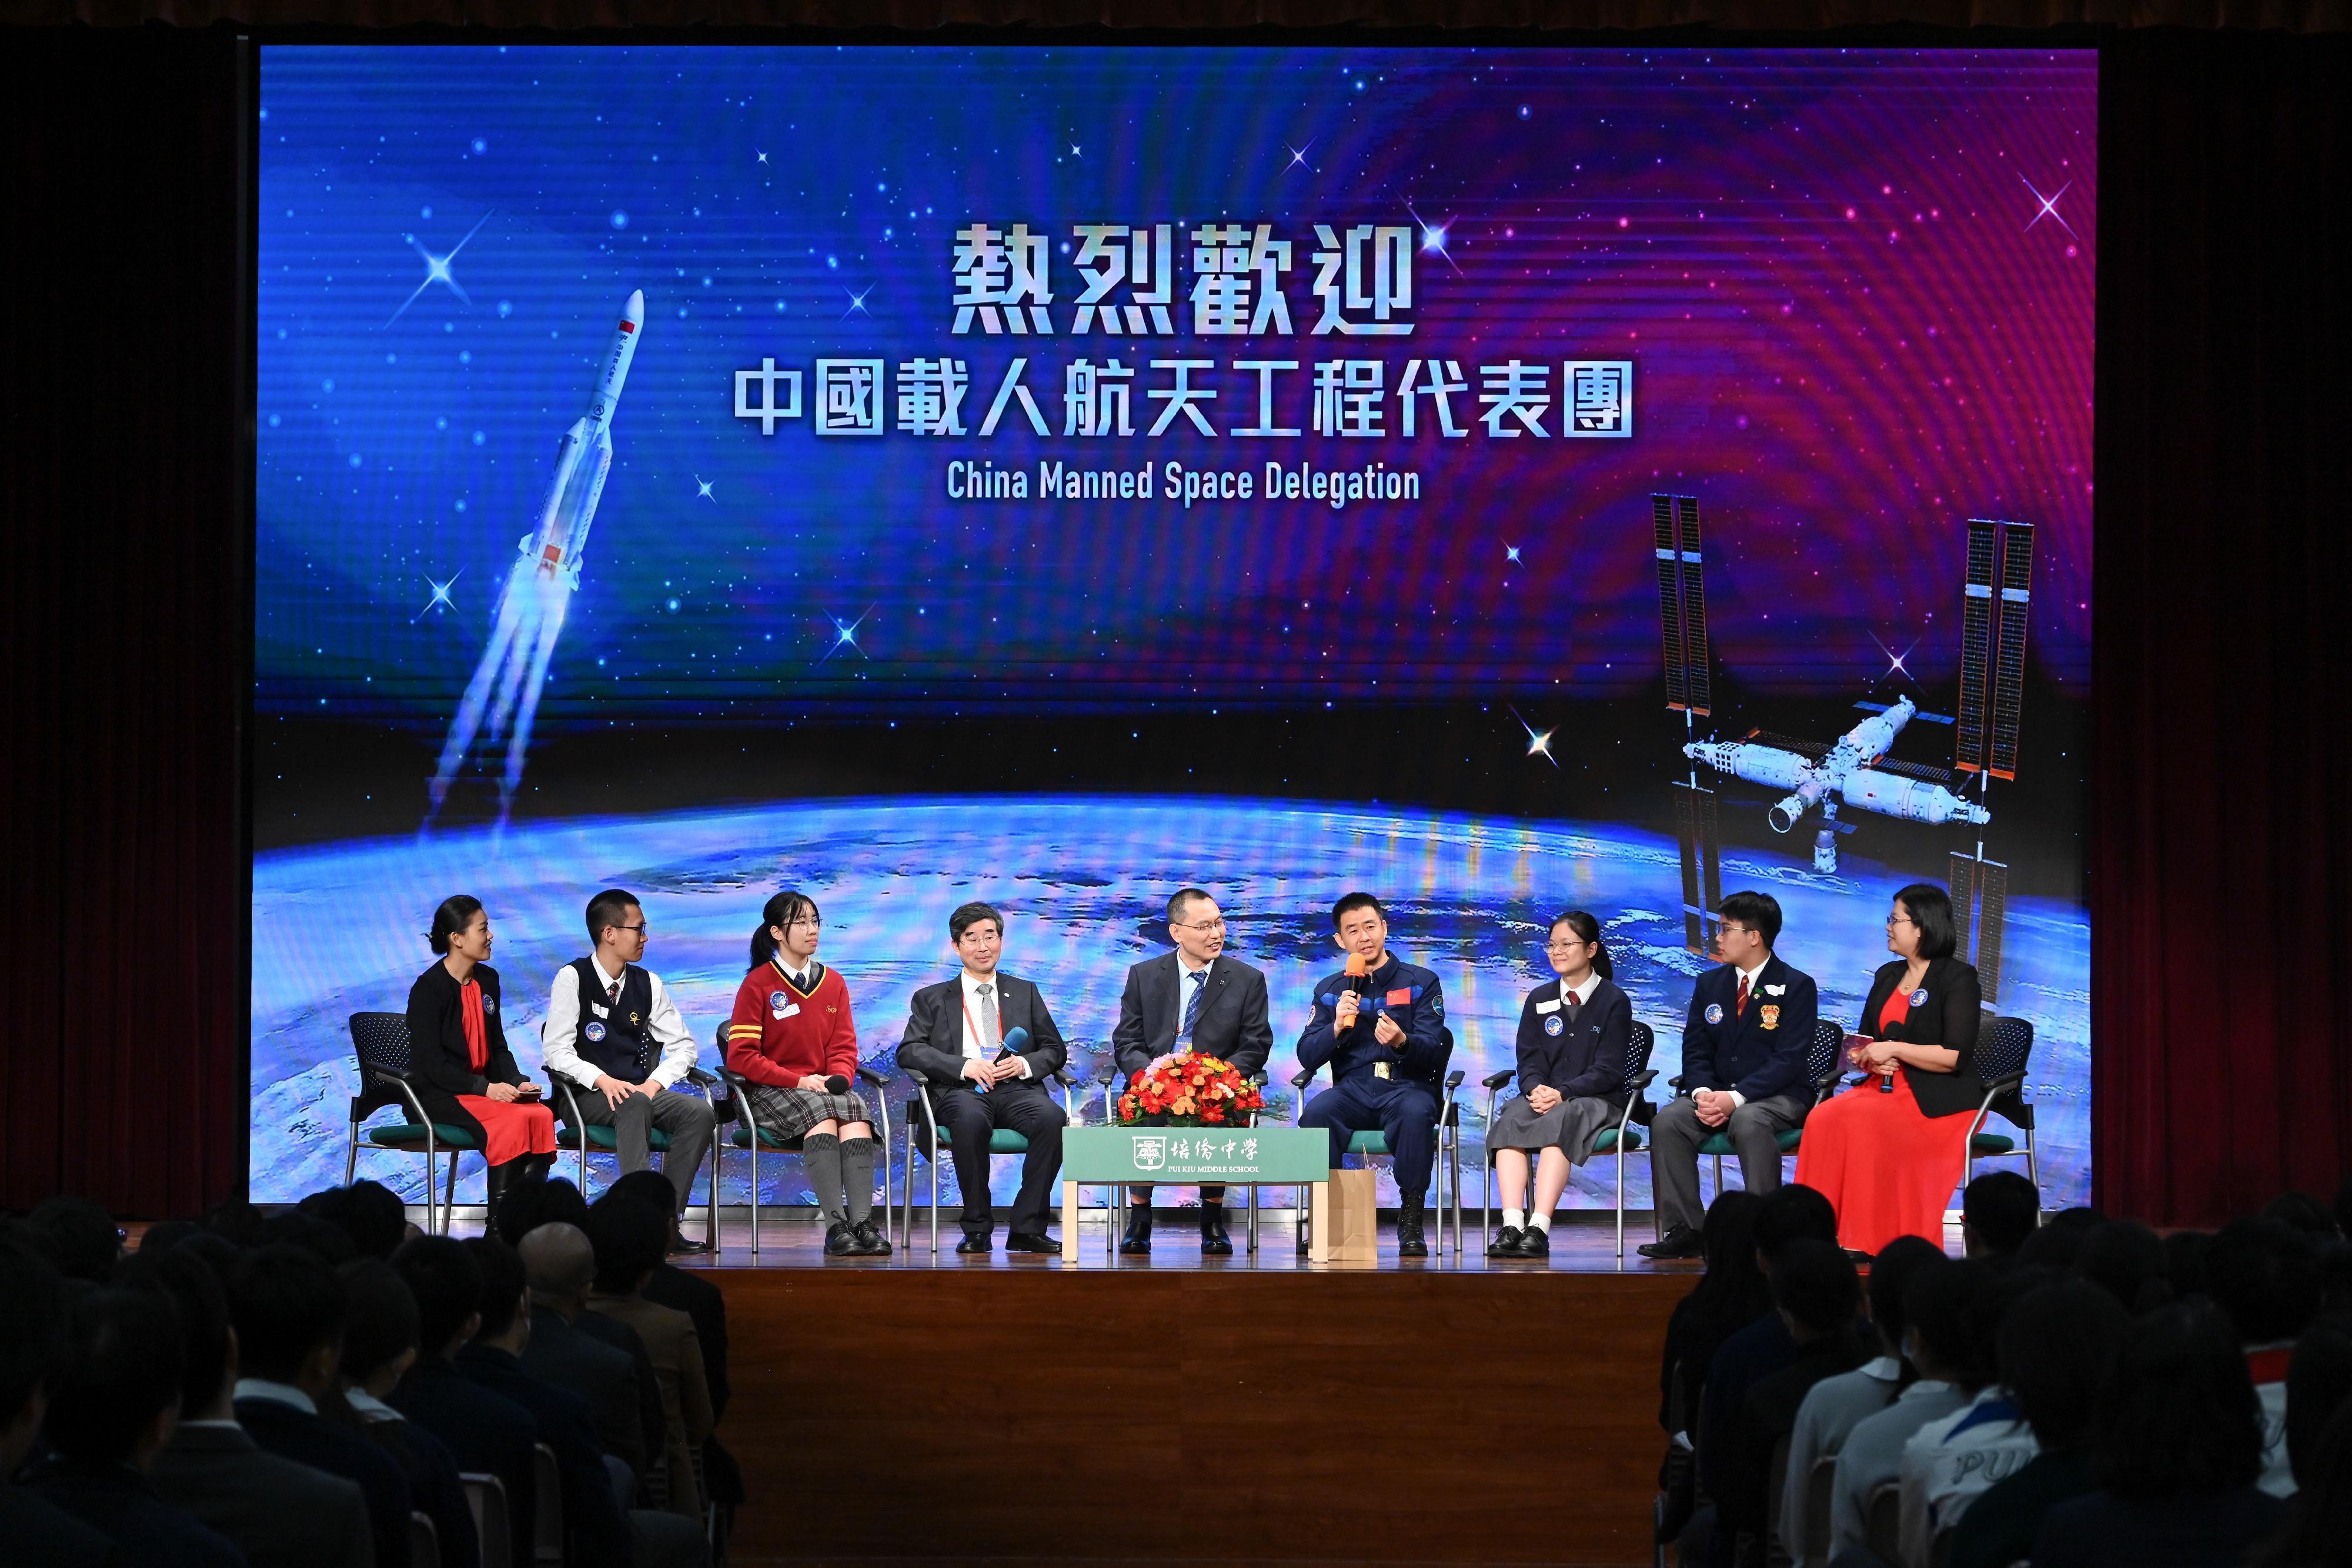 The China Manned Space delegation continued their visit in Hong Kong today (November 29). Photo shows (from fourth left) delegation member Mr Gan Keli; Assistant Chief Designer of the China Manned Space Program Mr Dong Nengli; and Shenzhou-14 mission commander Mr Chen Dong, attending a dialogue session with students at Pui Kiu Middle School.